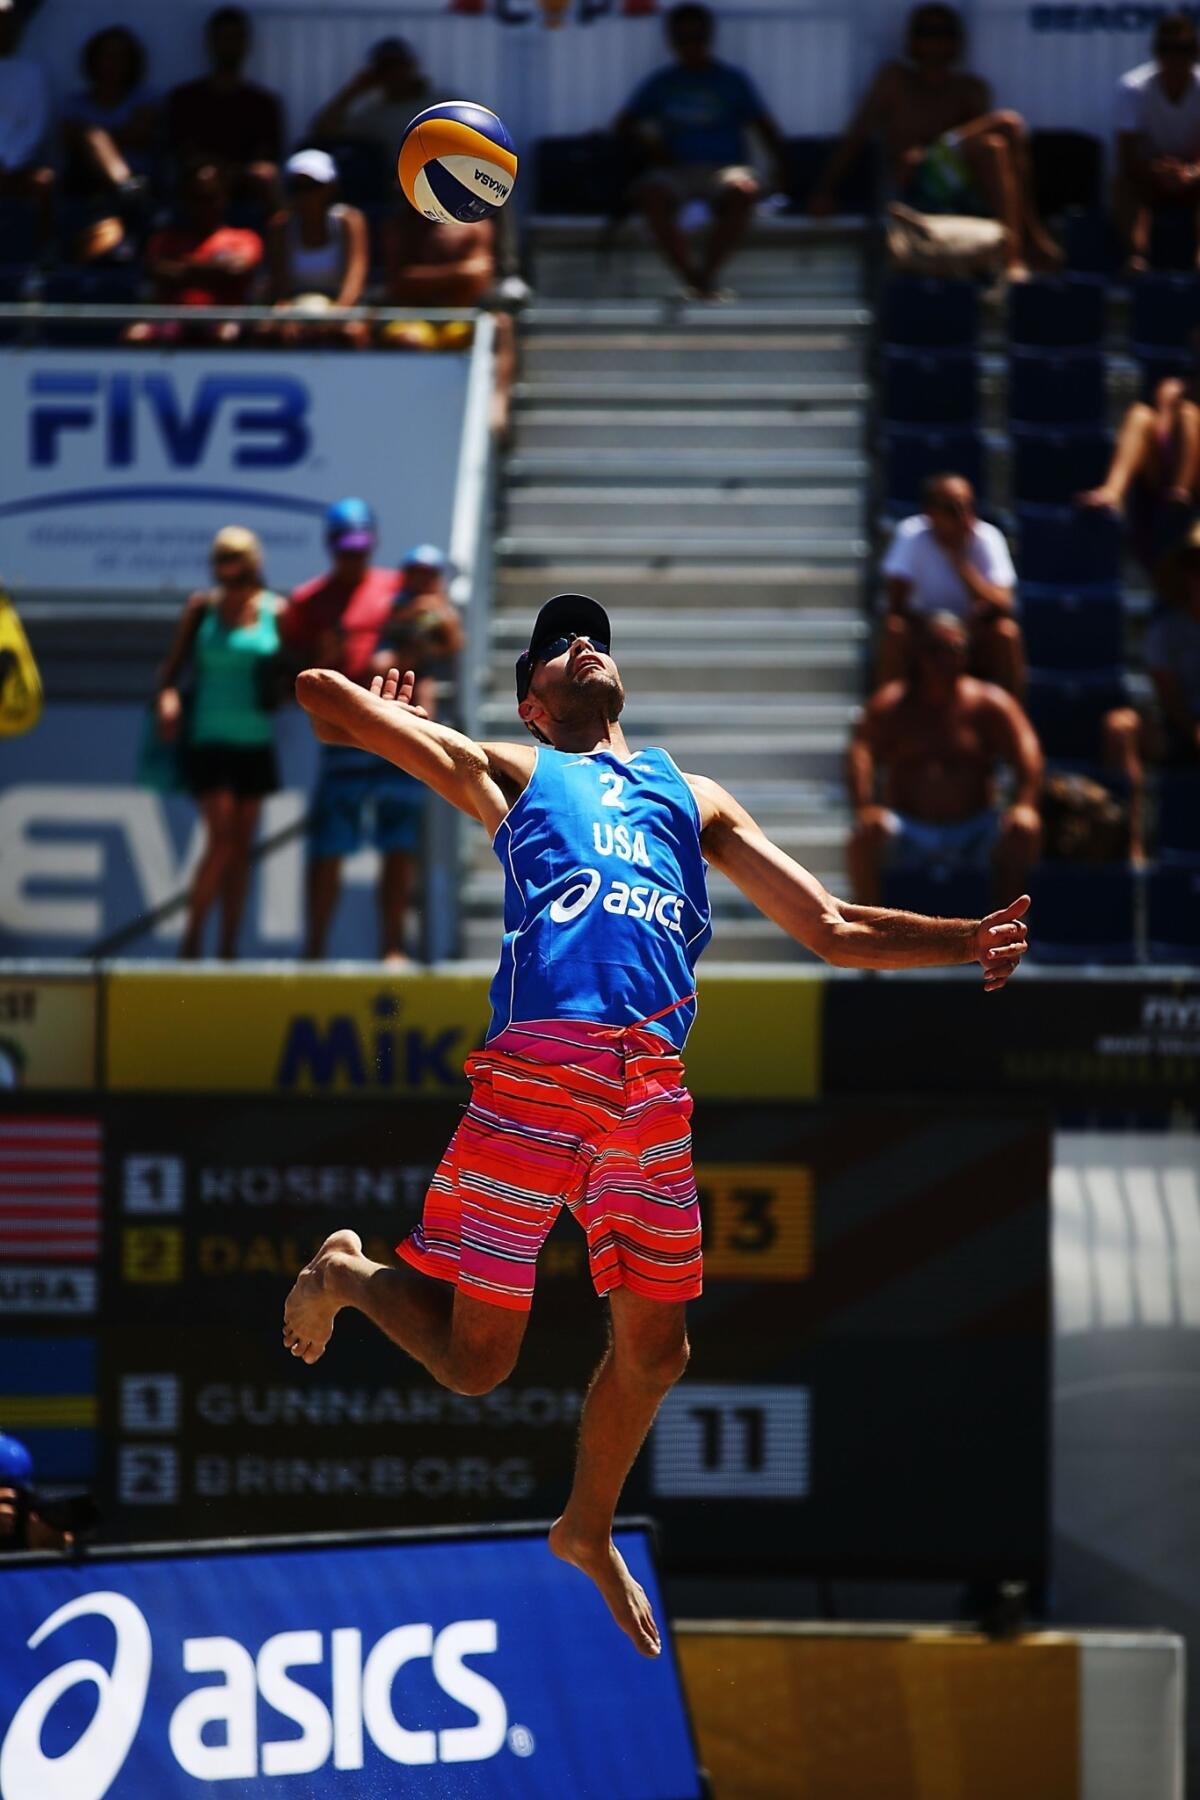 Phil Dalhausser serves during a pool-play match at the FIVB Grand Slam tournament in Long Beach on Wednesday.